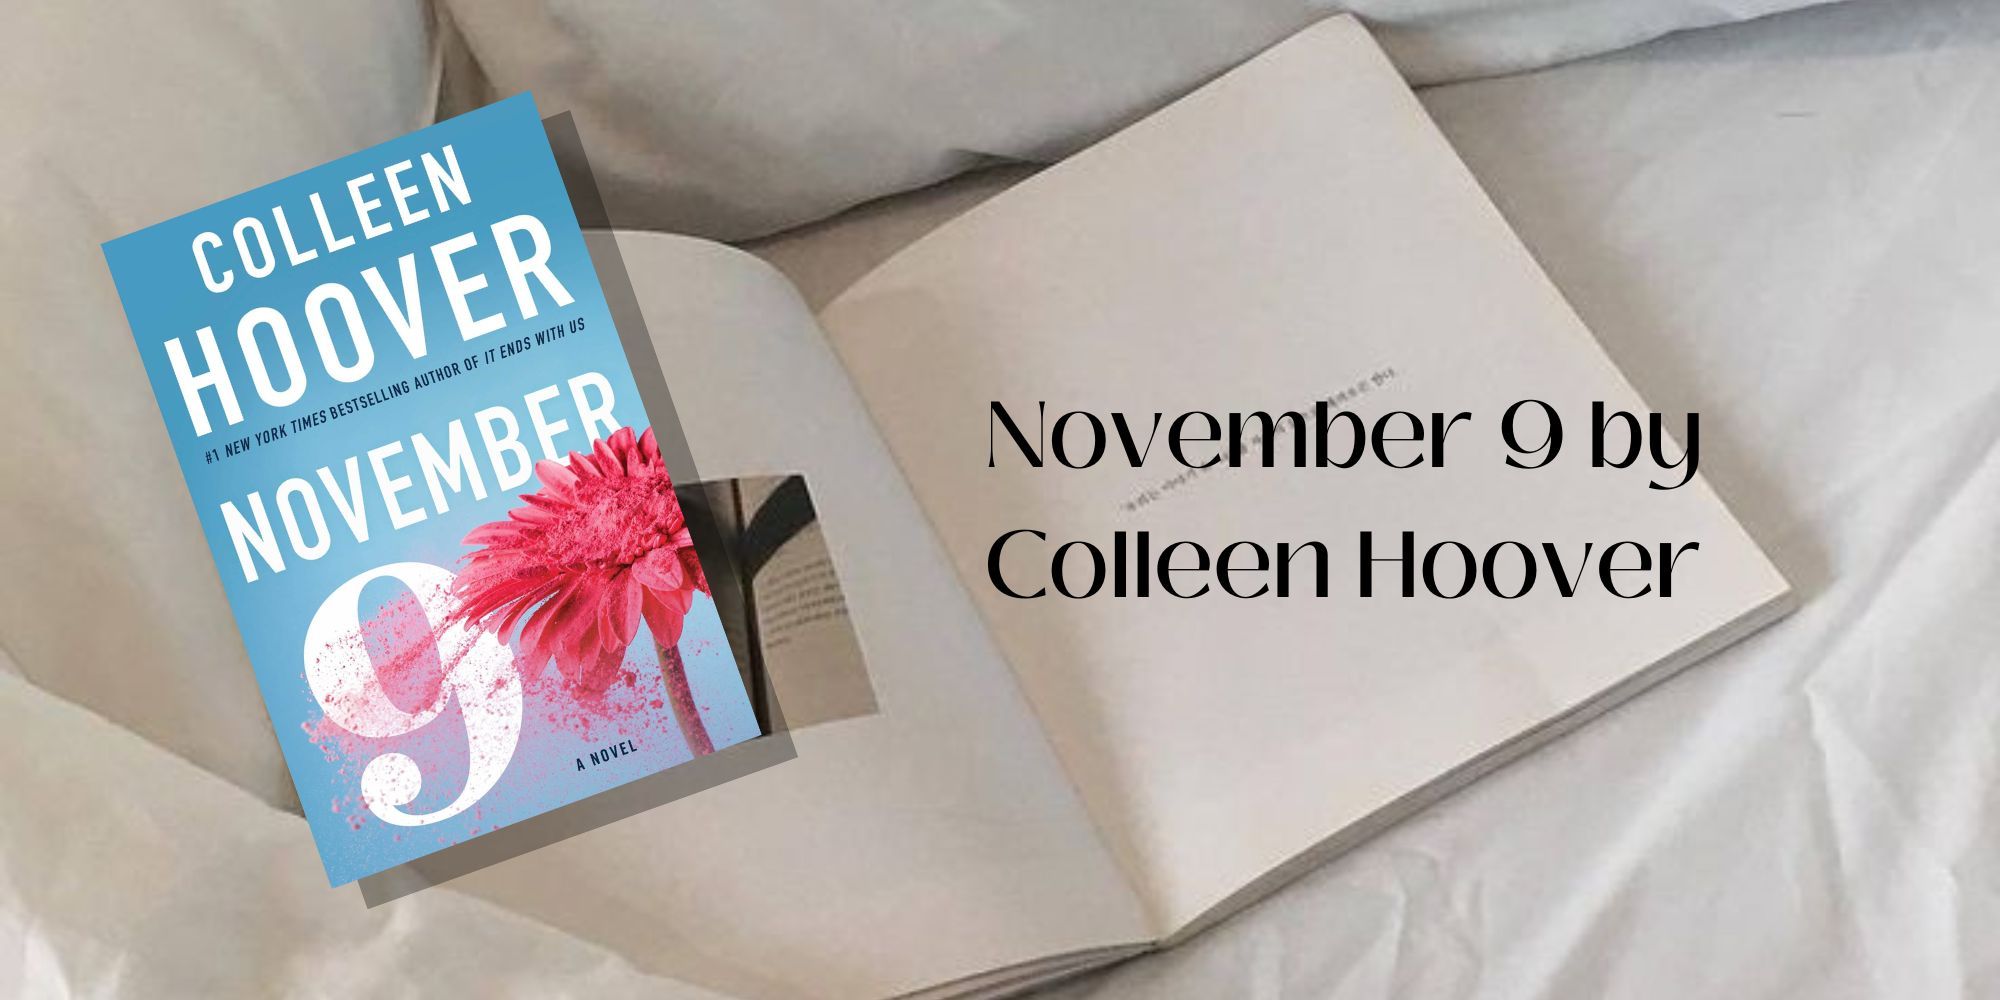 The cover of November 9 by Colleen Hoover